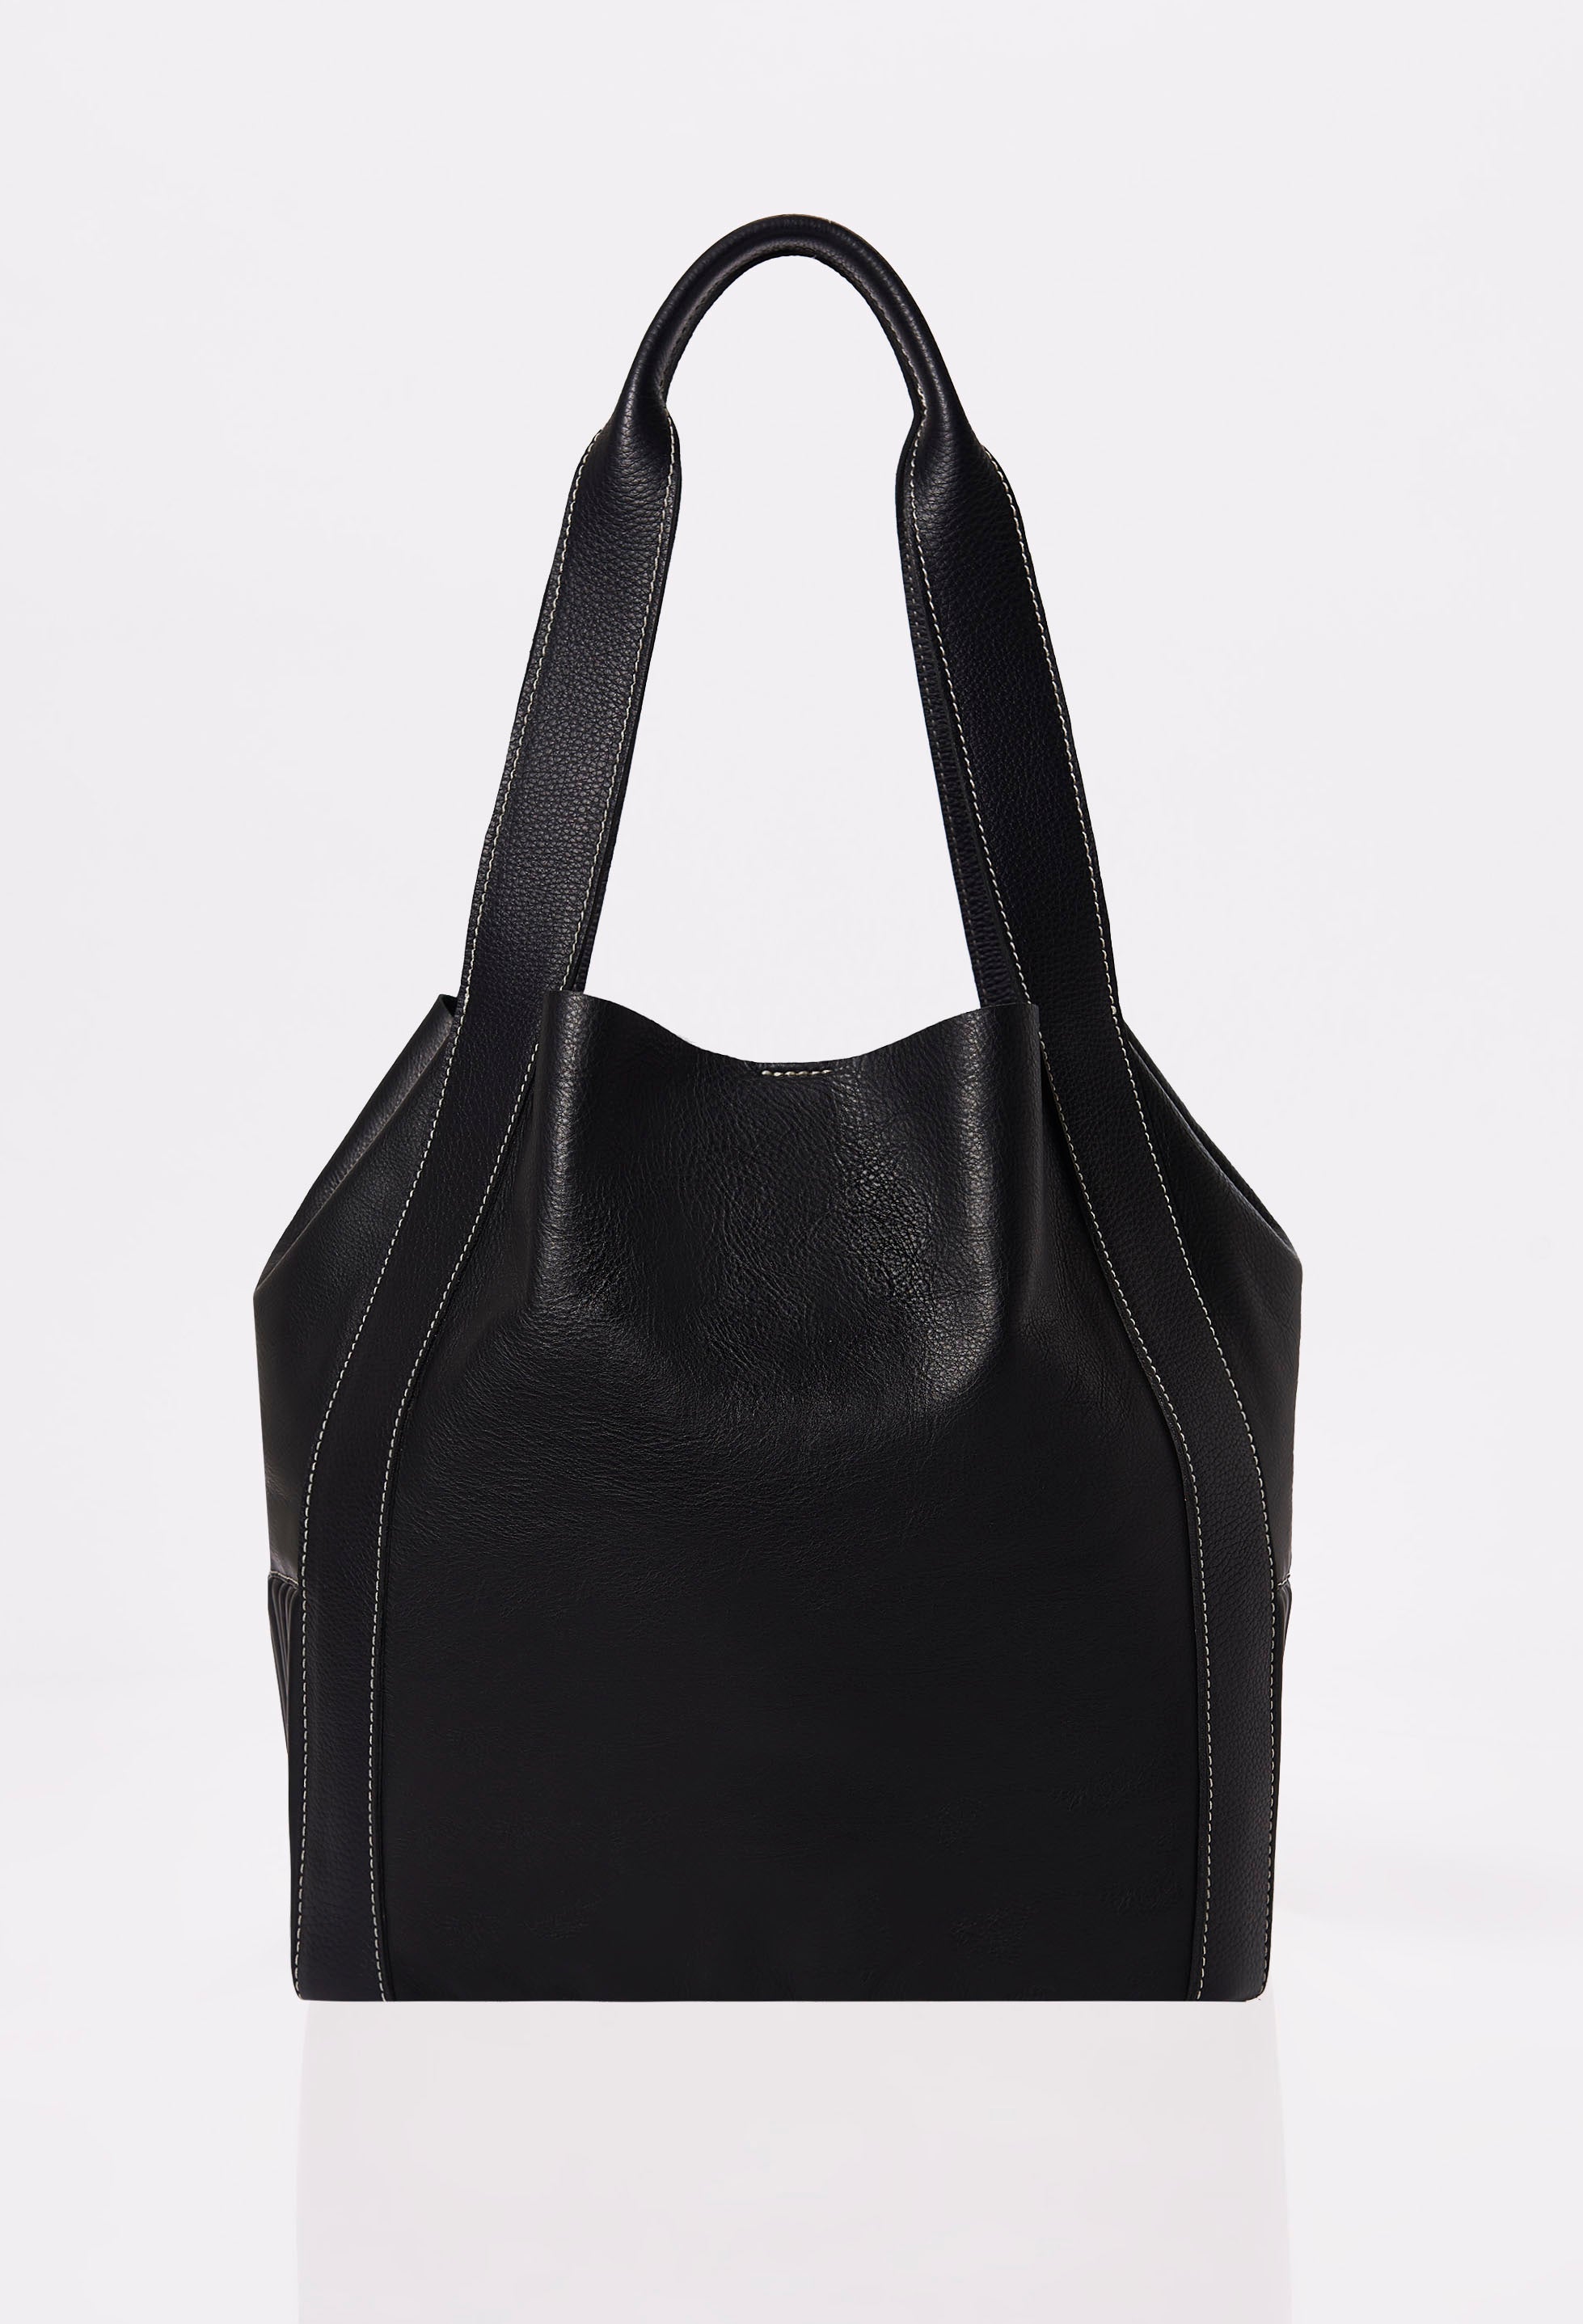 Rear of a Black Leather Bucket Bag Ushuaia with contrast stitching highlights.